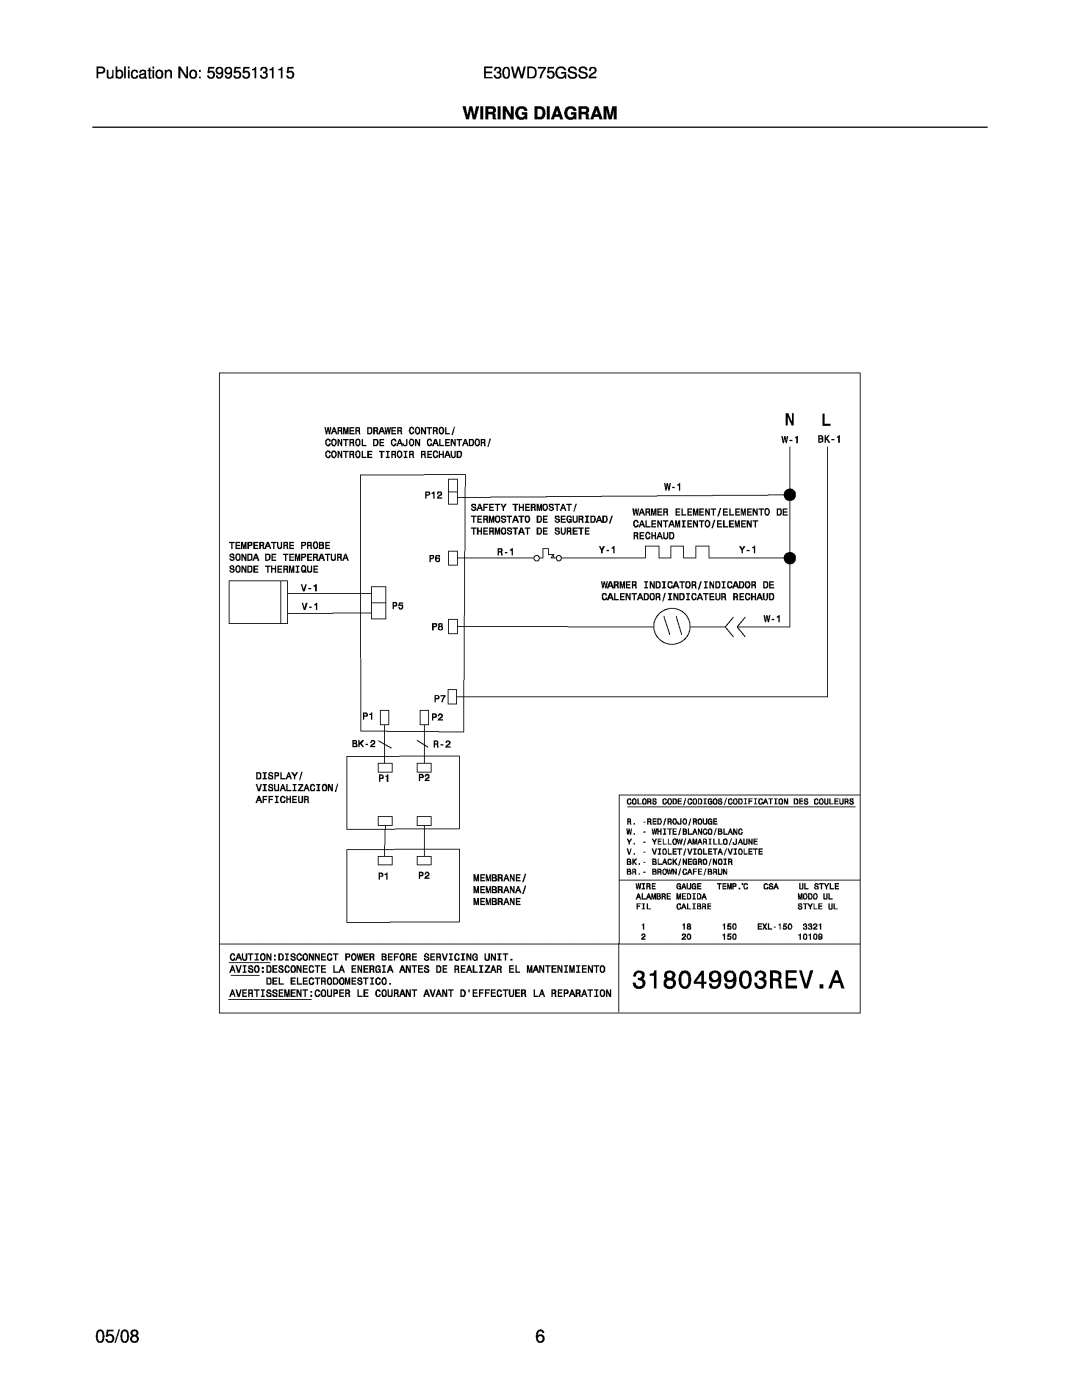 Electrolux 31266300870S2 installation instructions Wiring Diagram, 05/08, E30WD75GSS2 